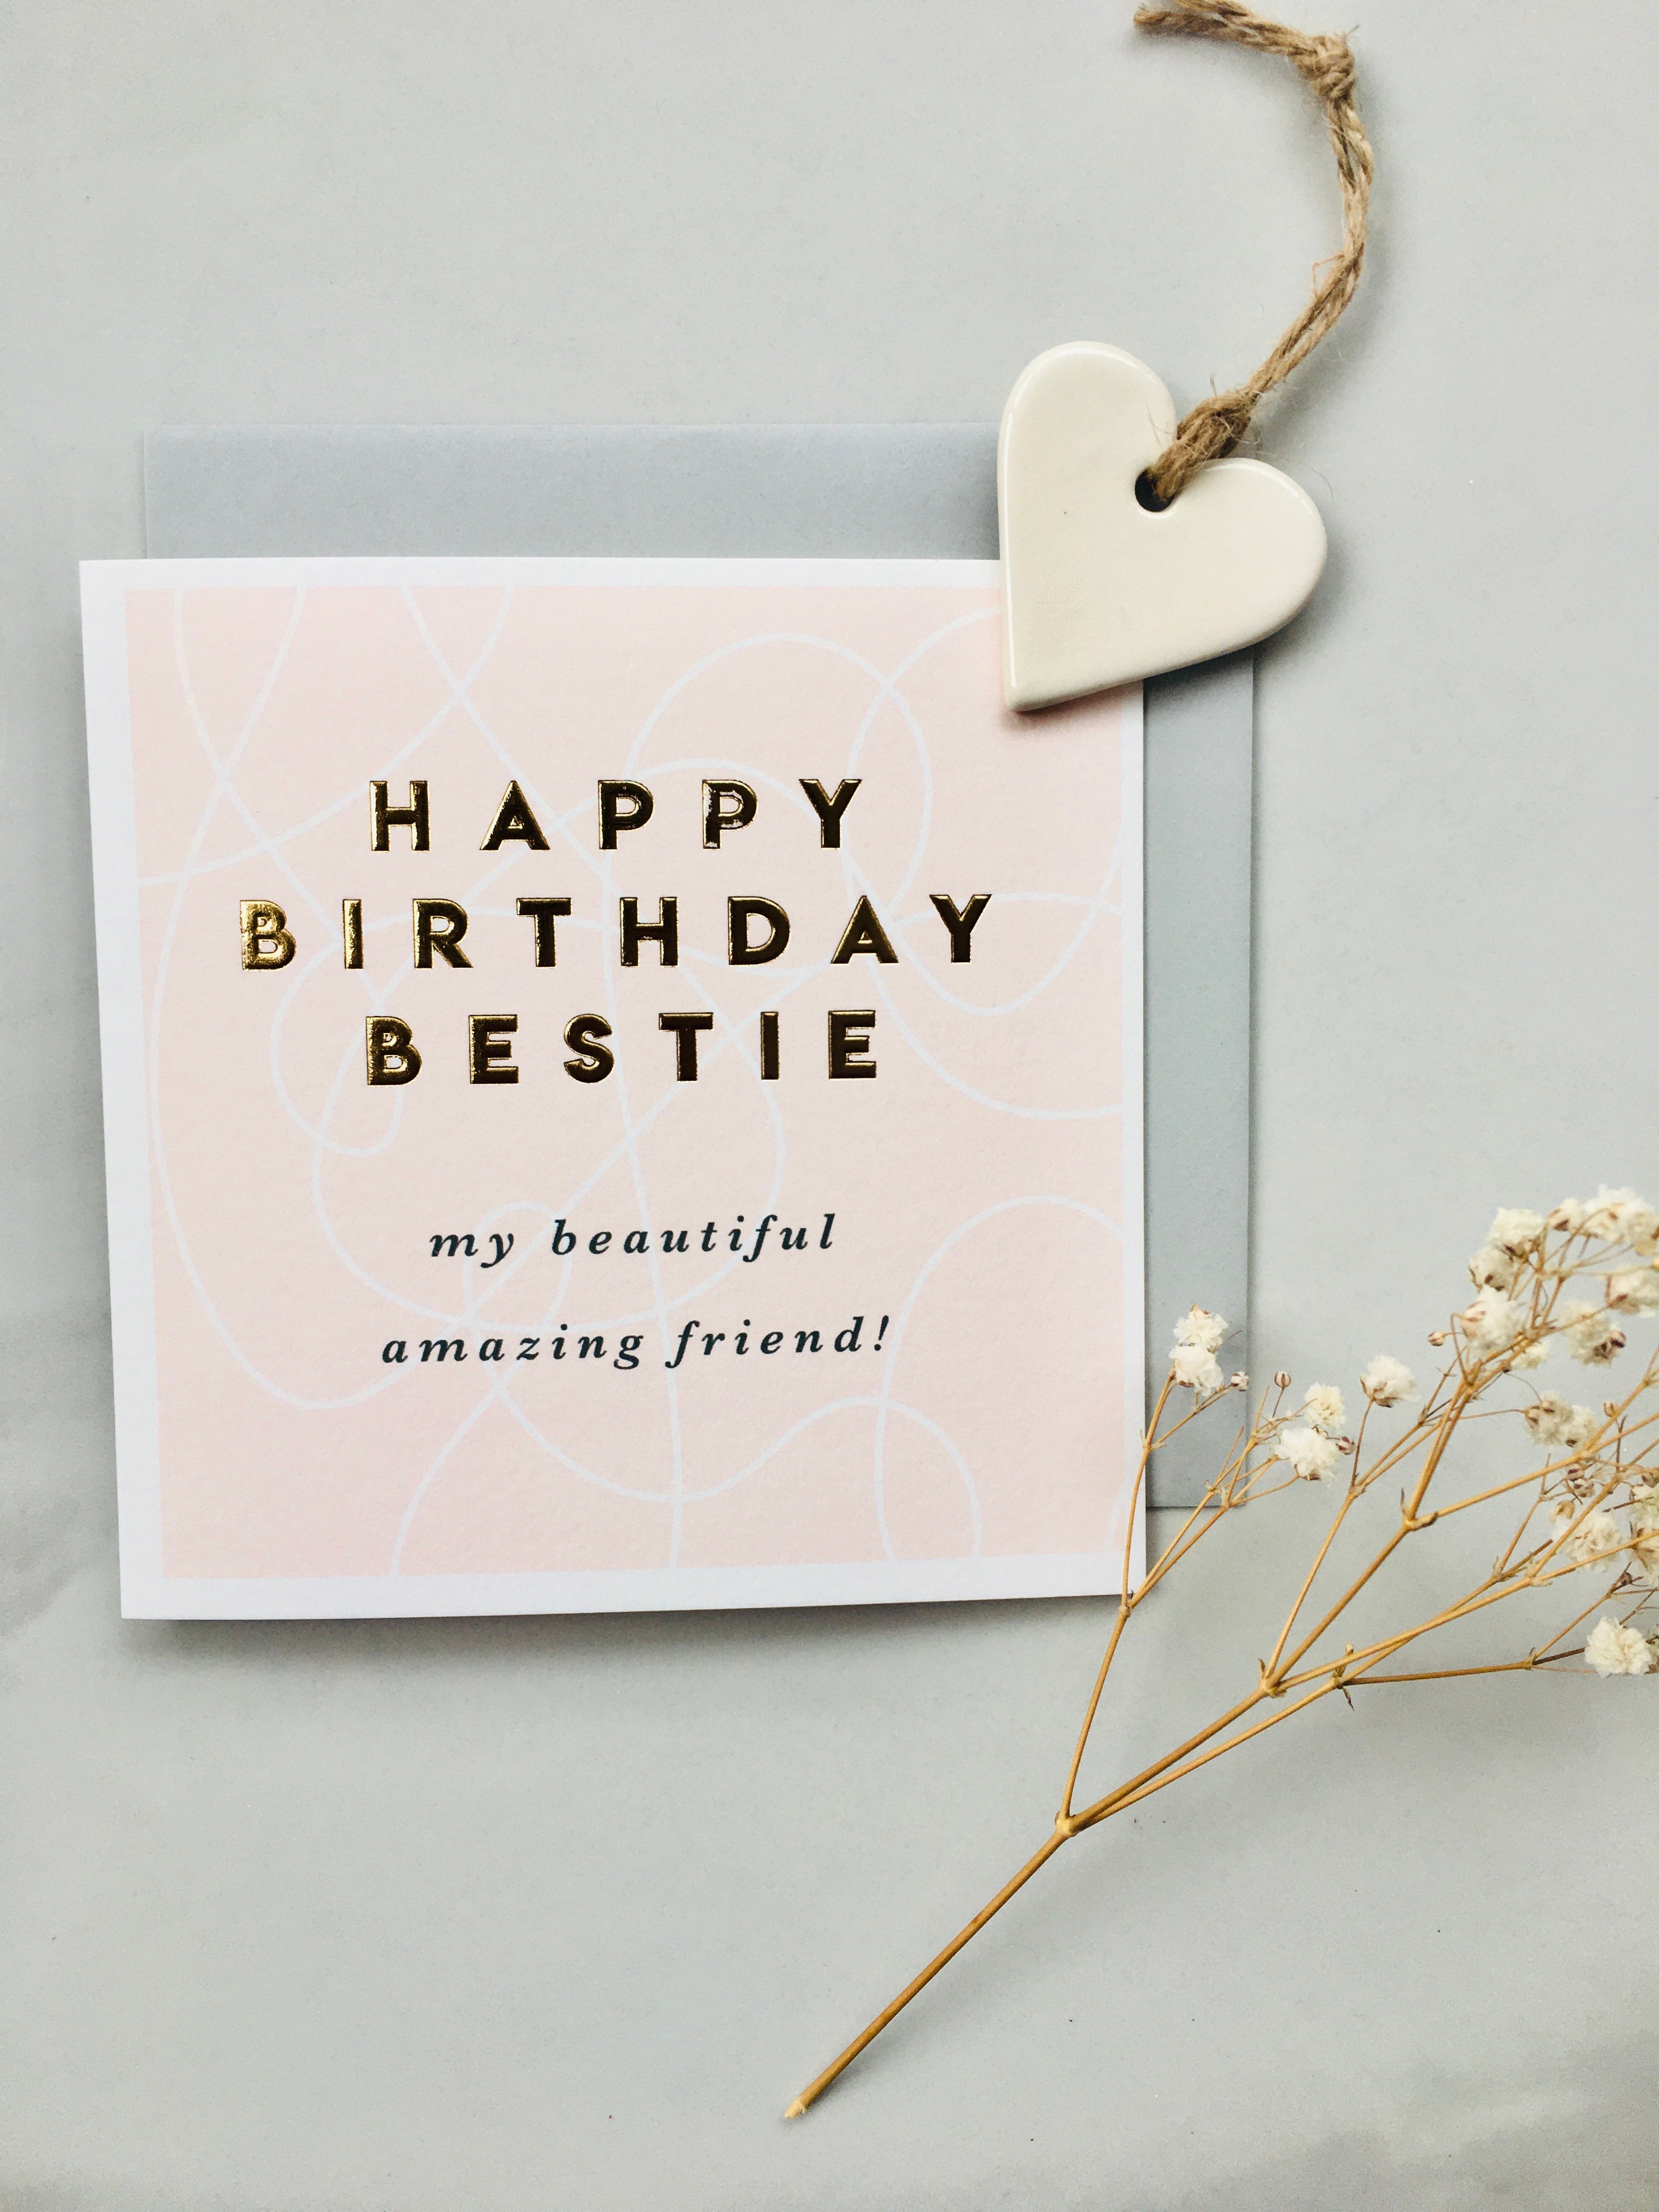 Happy Birthday Bestie Greeting Card – Ethical Gifting